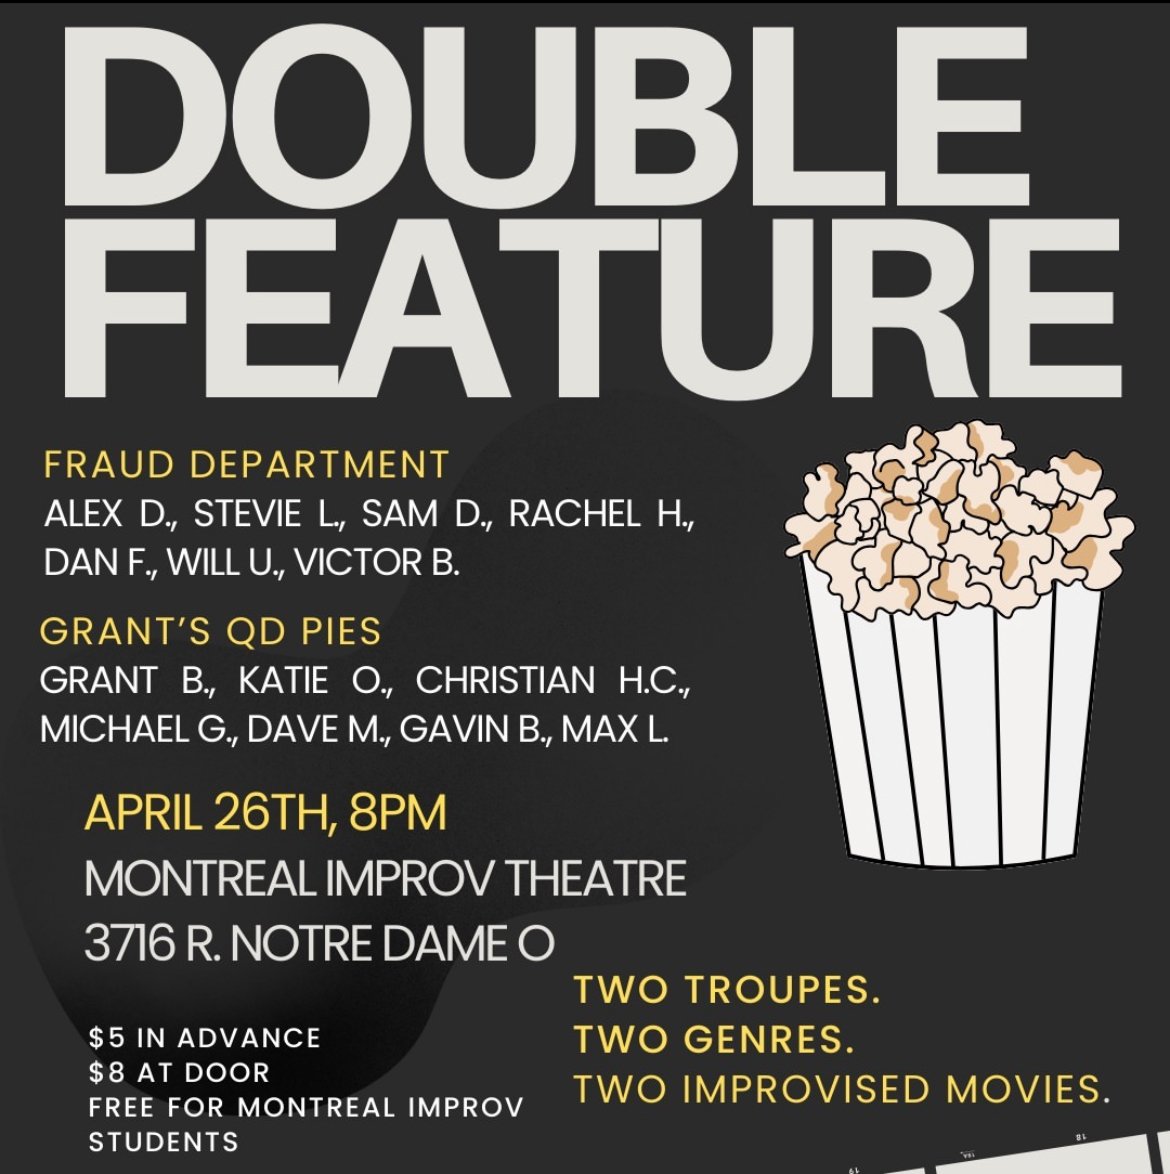 Join us for Double Feature on Friday, April 26th at 8pm!

In Double Feature, two talented and hilarious groups of improvisers will each bring a film genre and improvise a 30-minute film based on audience suggestions. Will any of these two films be Os